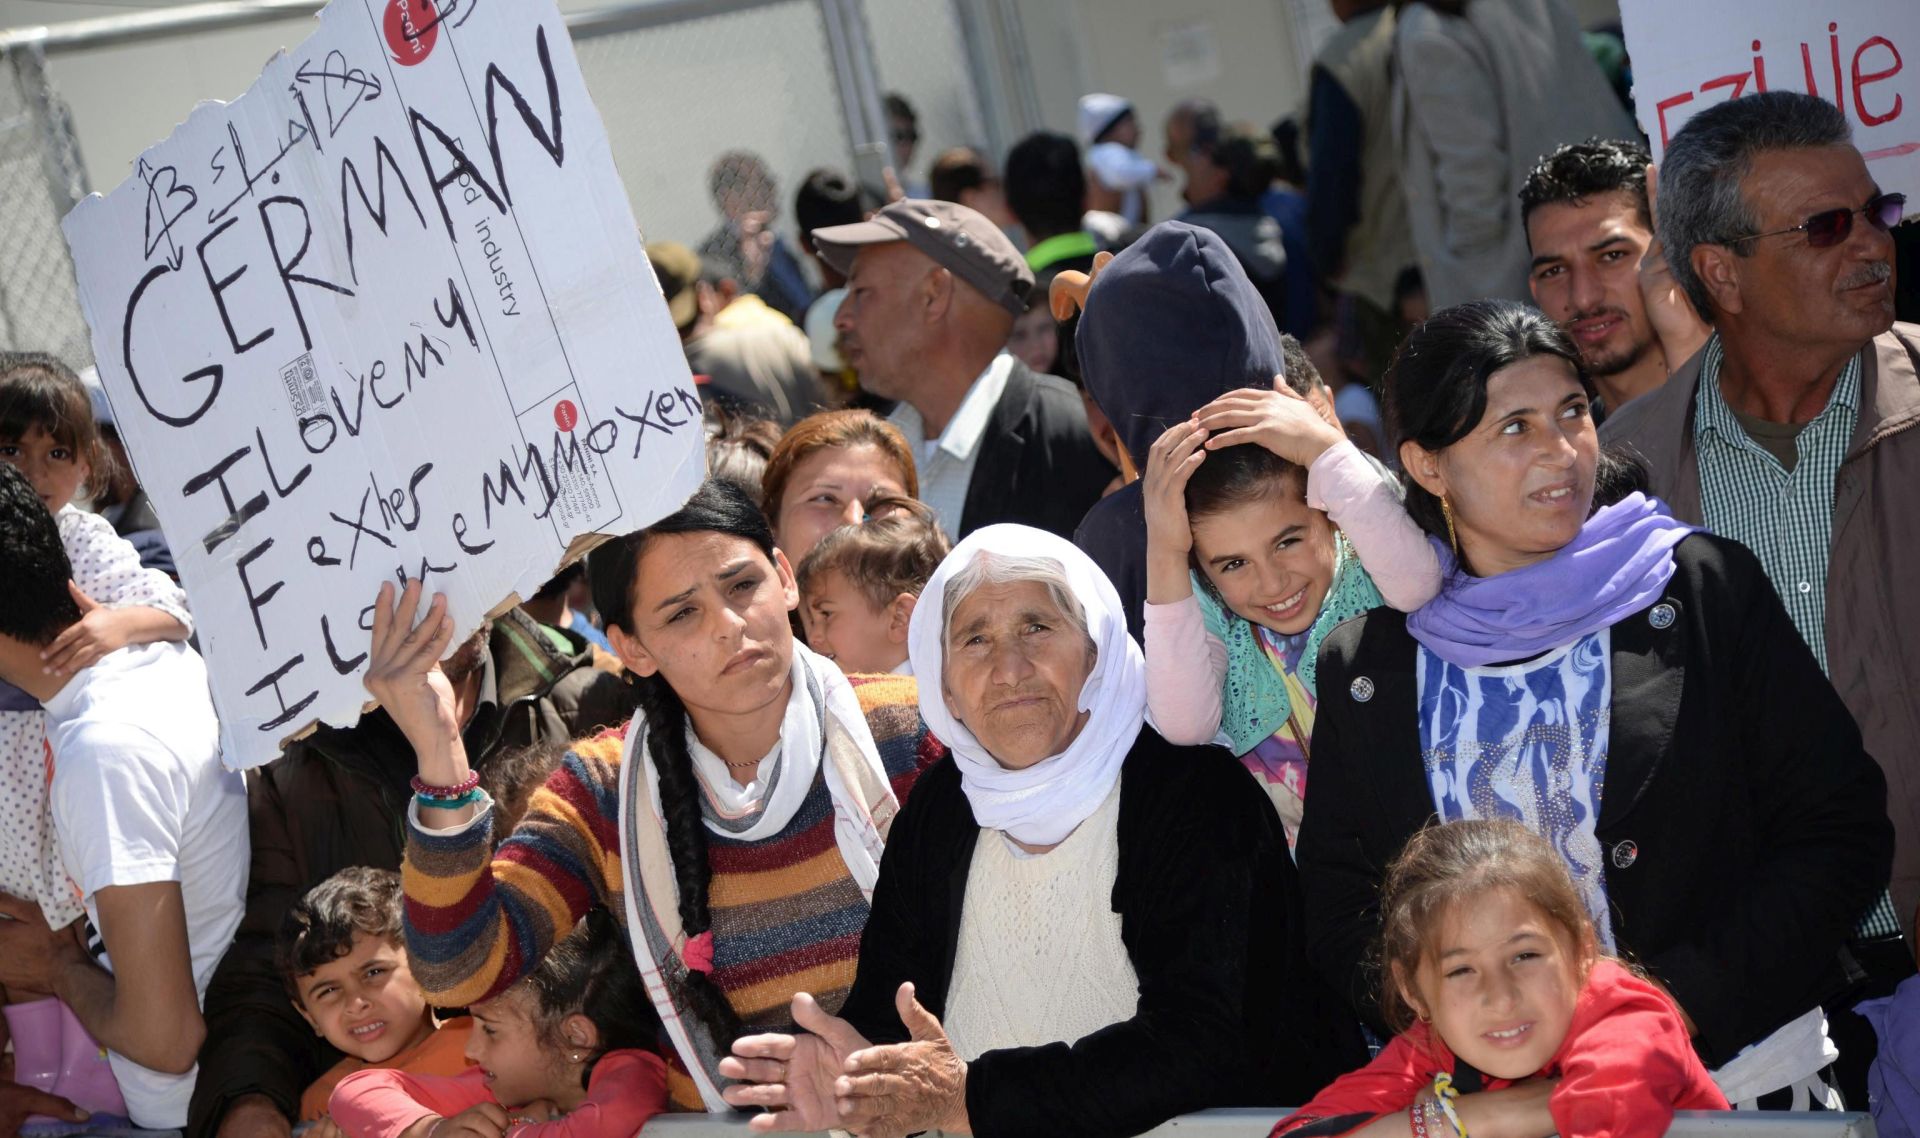 epa05261534 Migrants and refugees hold placards as Pope Francis visits the Moria refugee camp near the port of Mytilene on the island of Lesbos, Greece, 16 April 2016. Pope Francis visits the Greek island of Lesbos on 16 April, in a trip aimed at supporting refugees and drawing attention to the frontline of Europe's migration crisis.  EPA/FILIPPO MONTEFORTE / POOL